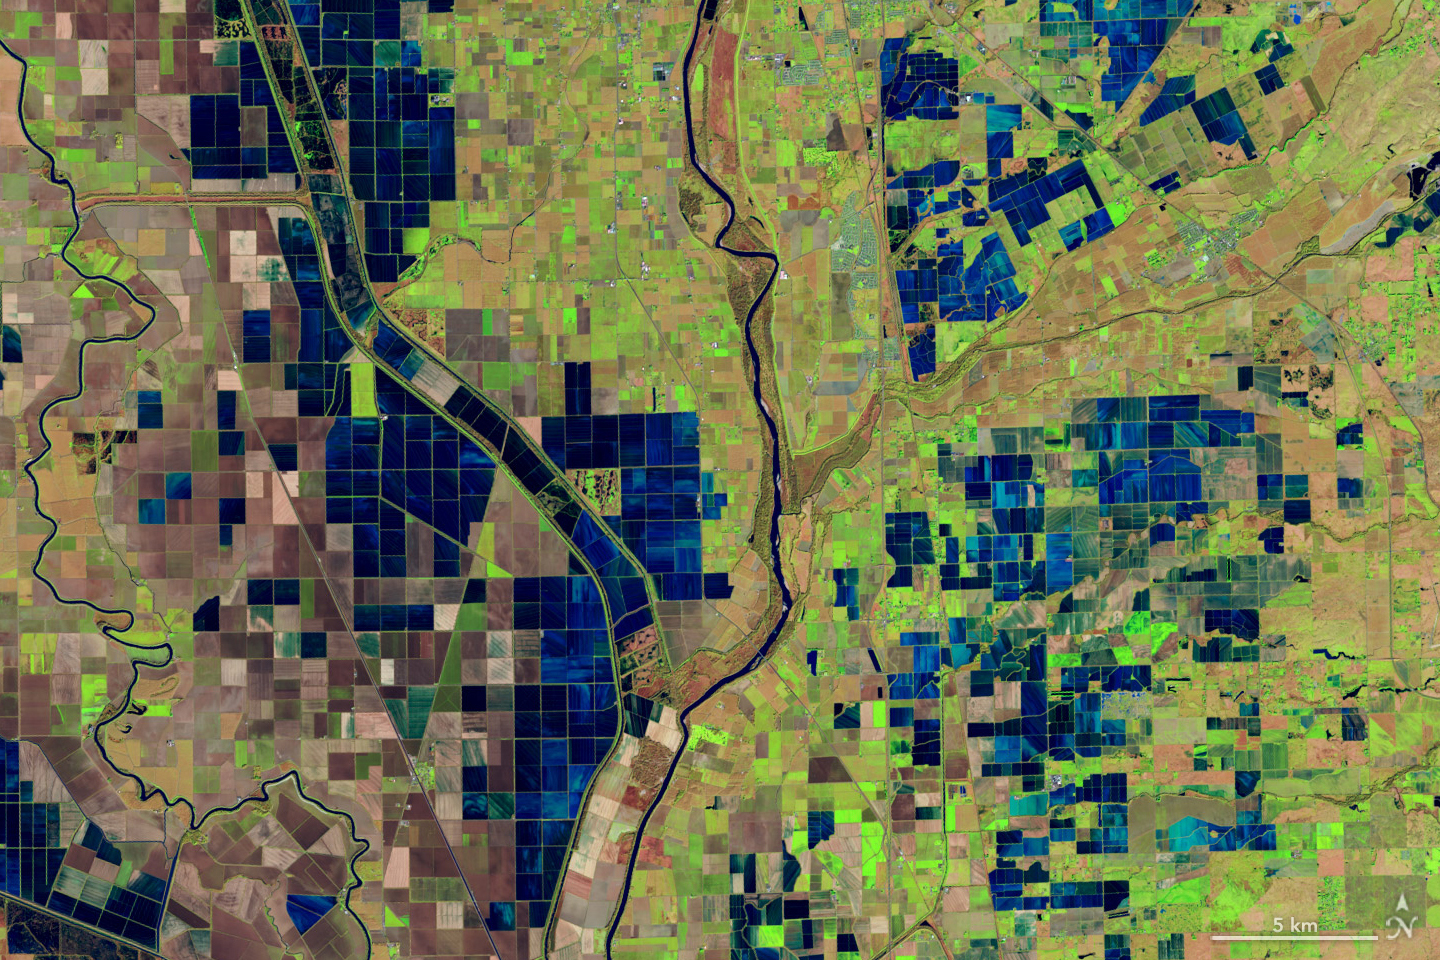 This satellite image centers the meandering Sacramento river surrounded by rice fields. The fields are broken into primarily square and rectangular areas with the fields nearest the river being full of green and brown vegetation, and farther from the river they are flooded and appear dark blue.